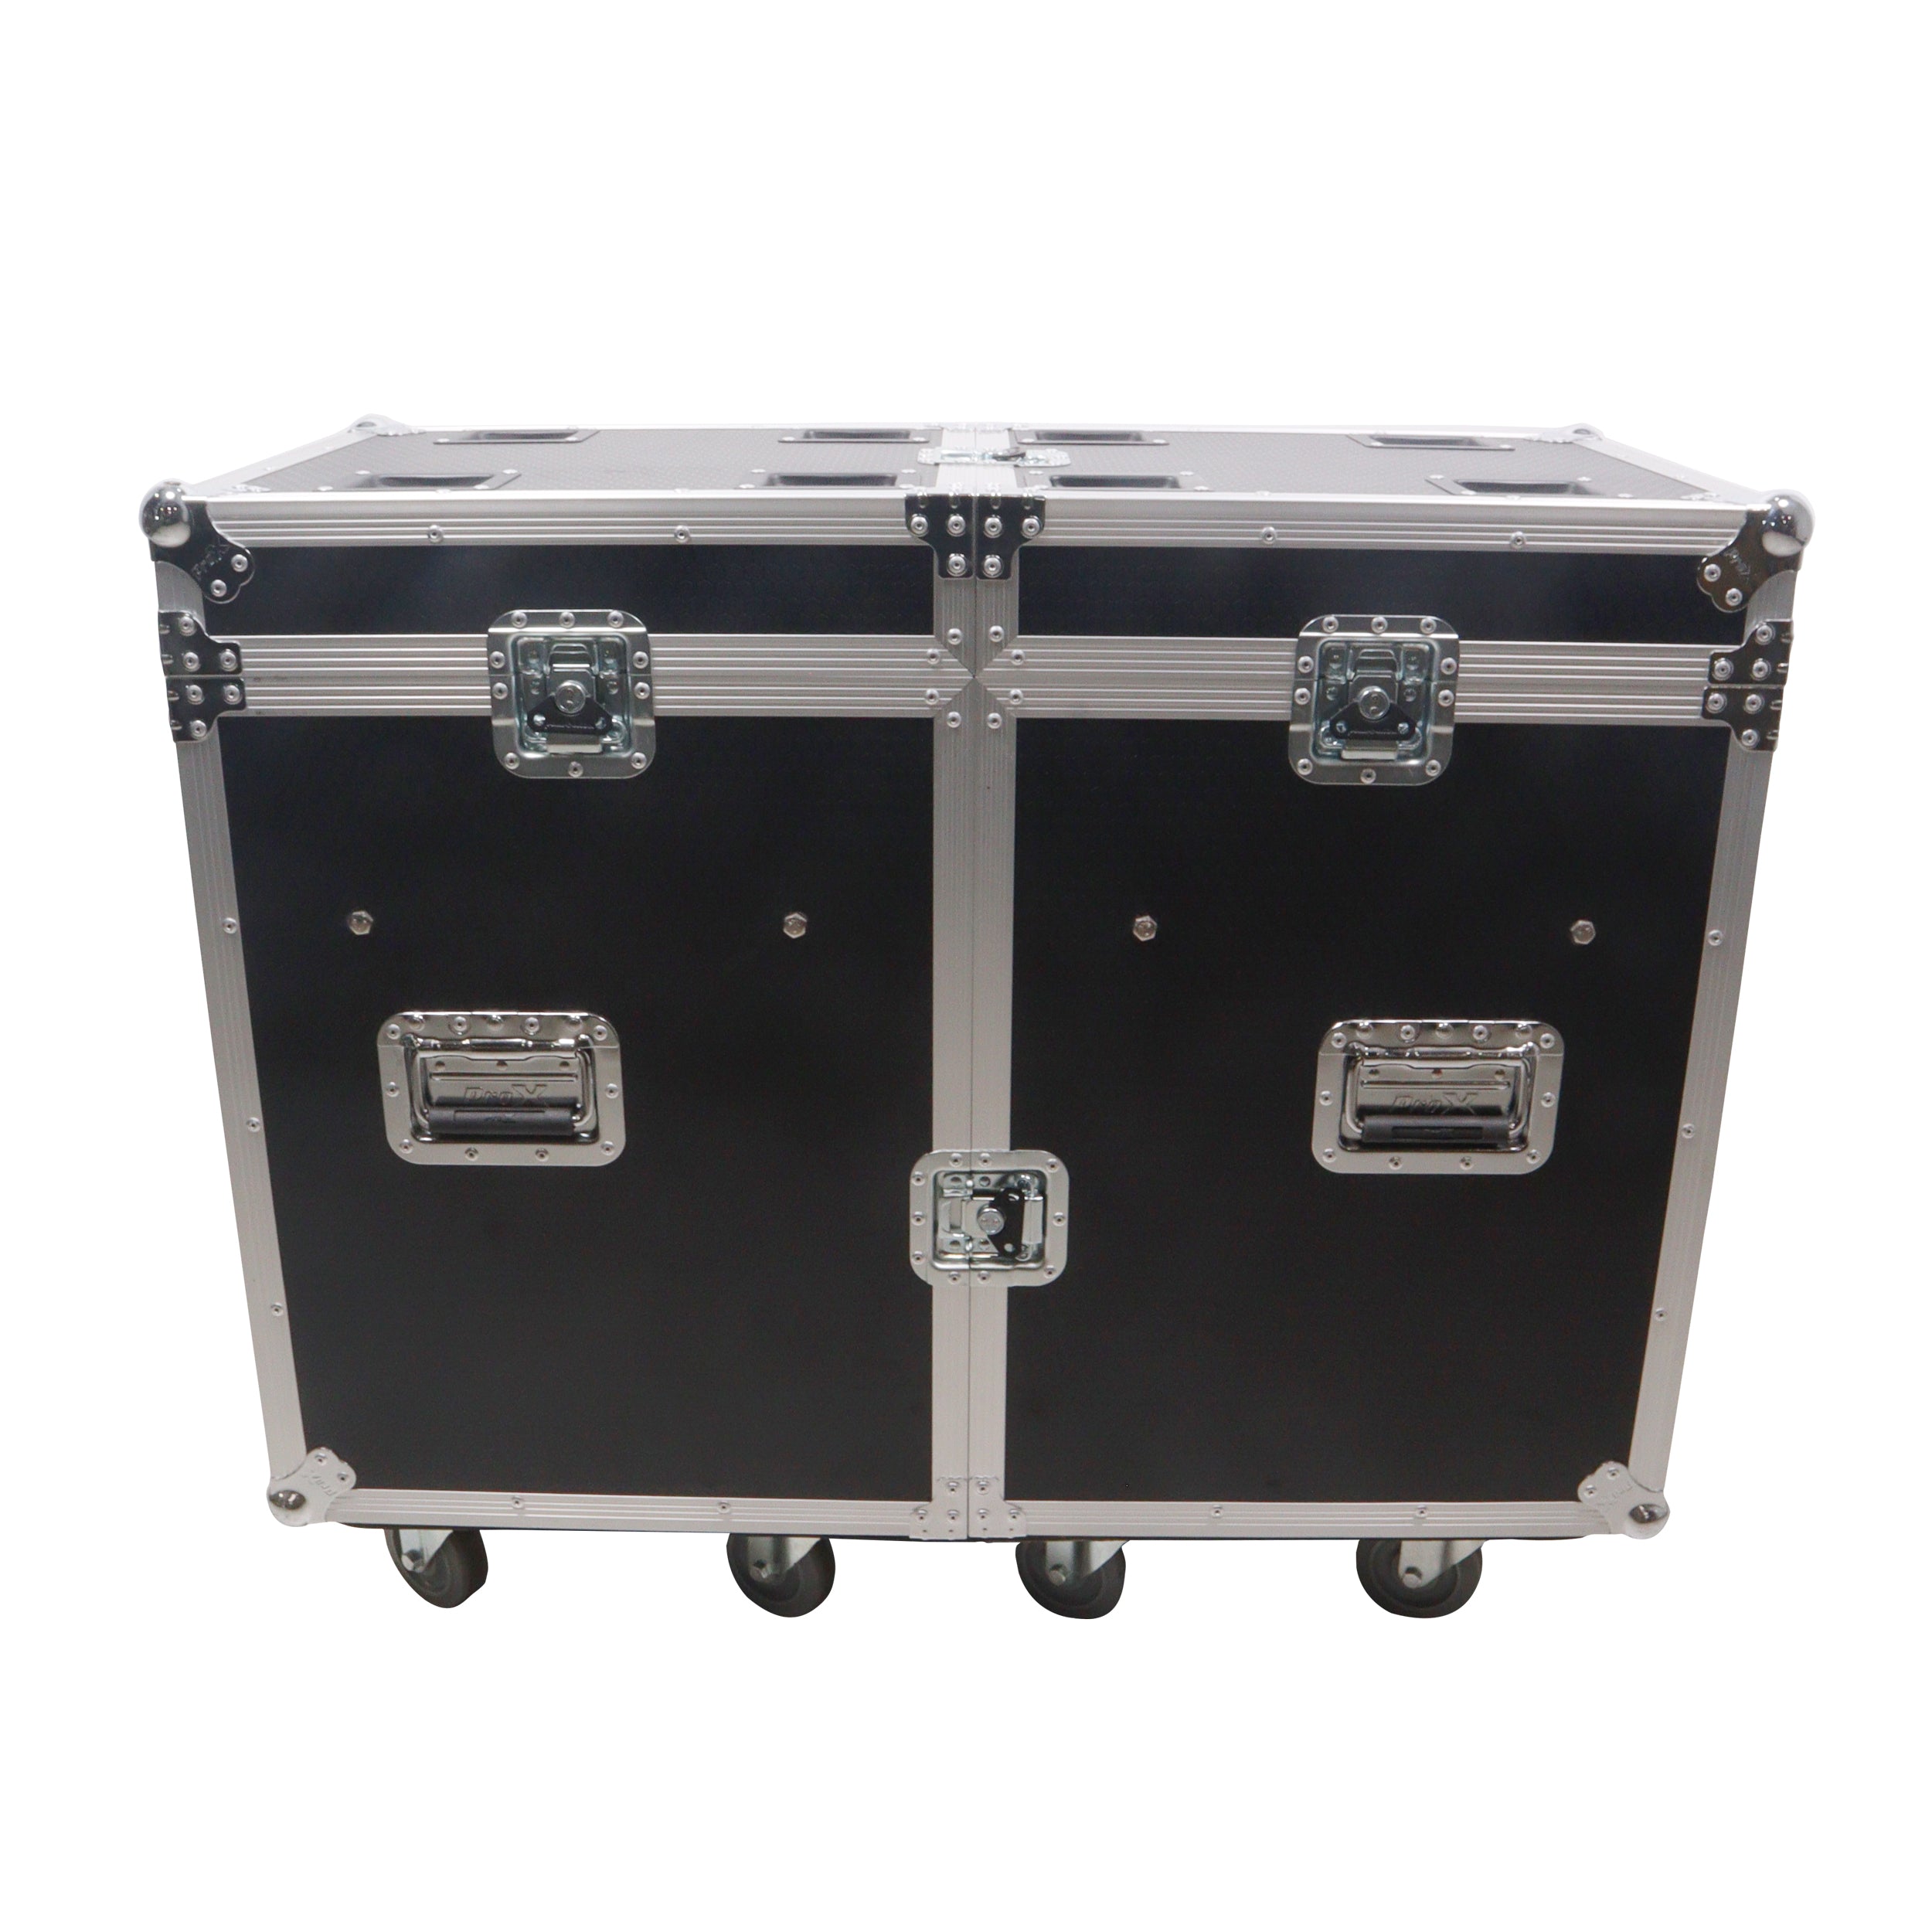 Pro X ATA Flight Style Road Case for (2) Moving Head Lighting Fixtures with (6) 4 inch Casters XS-MH275X2W